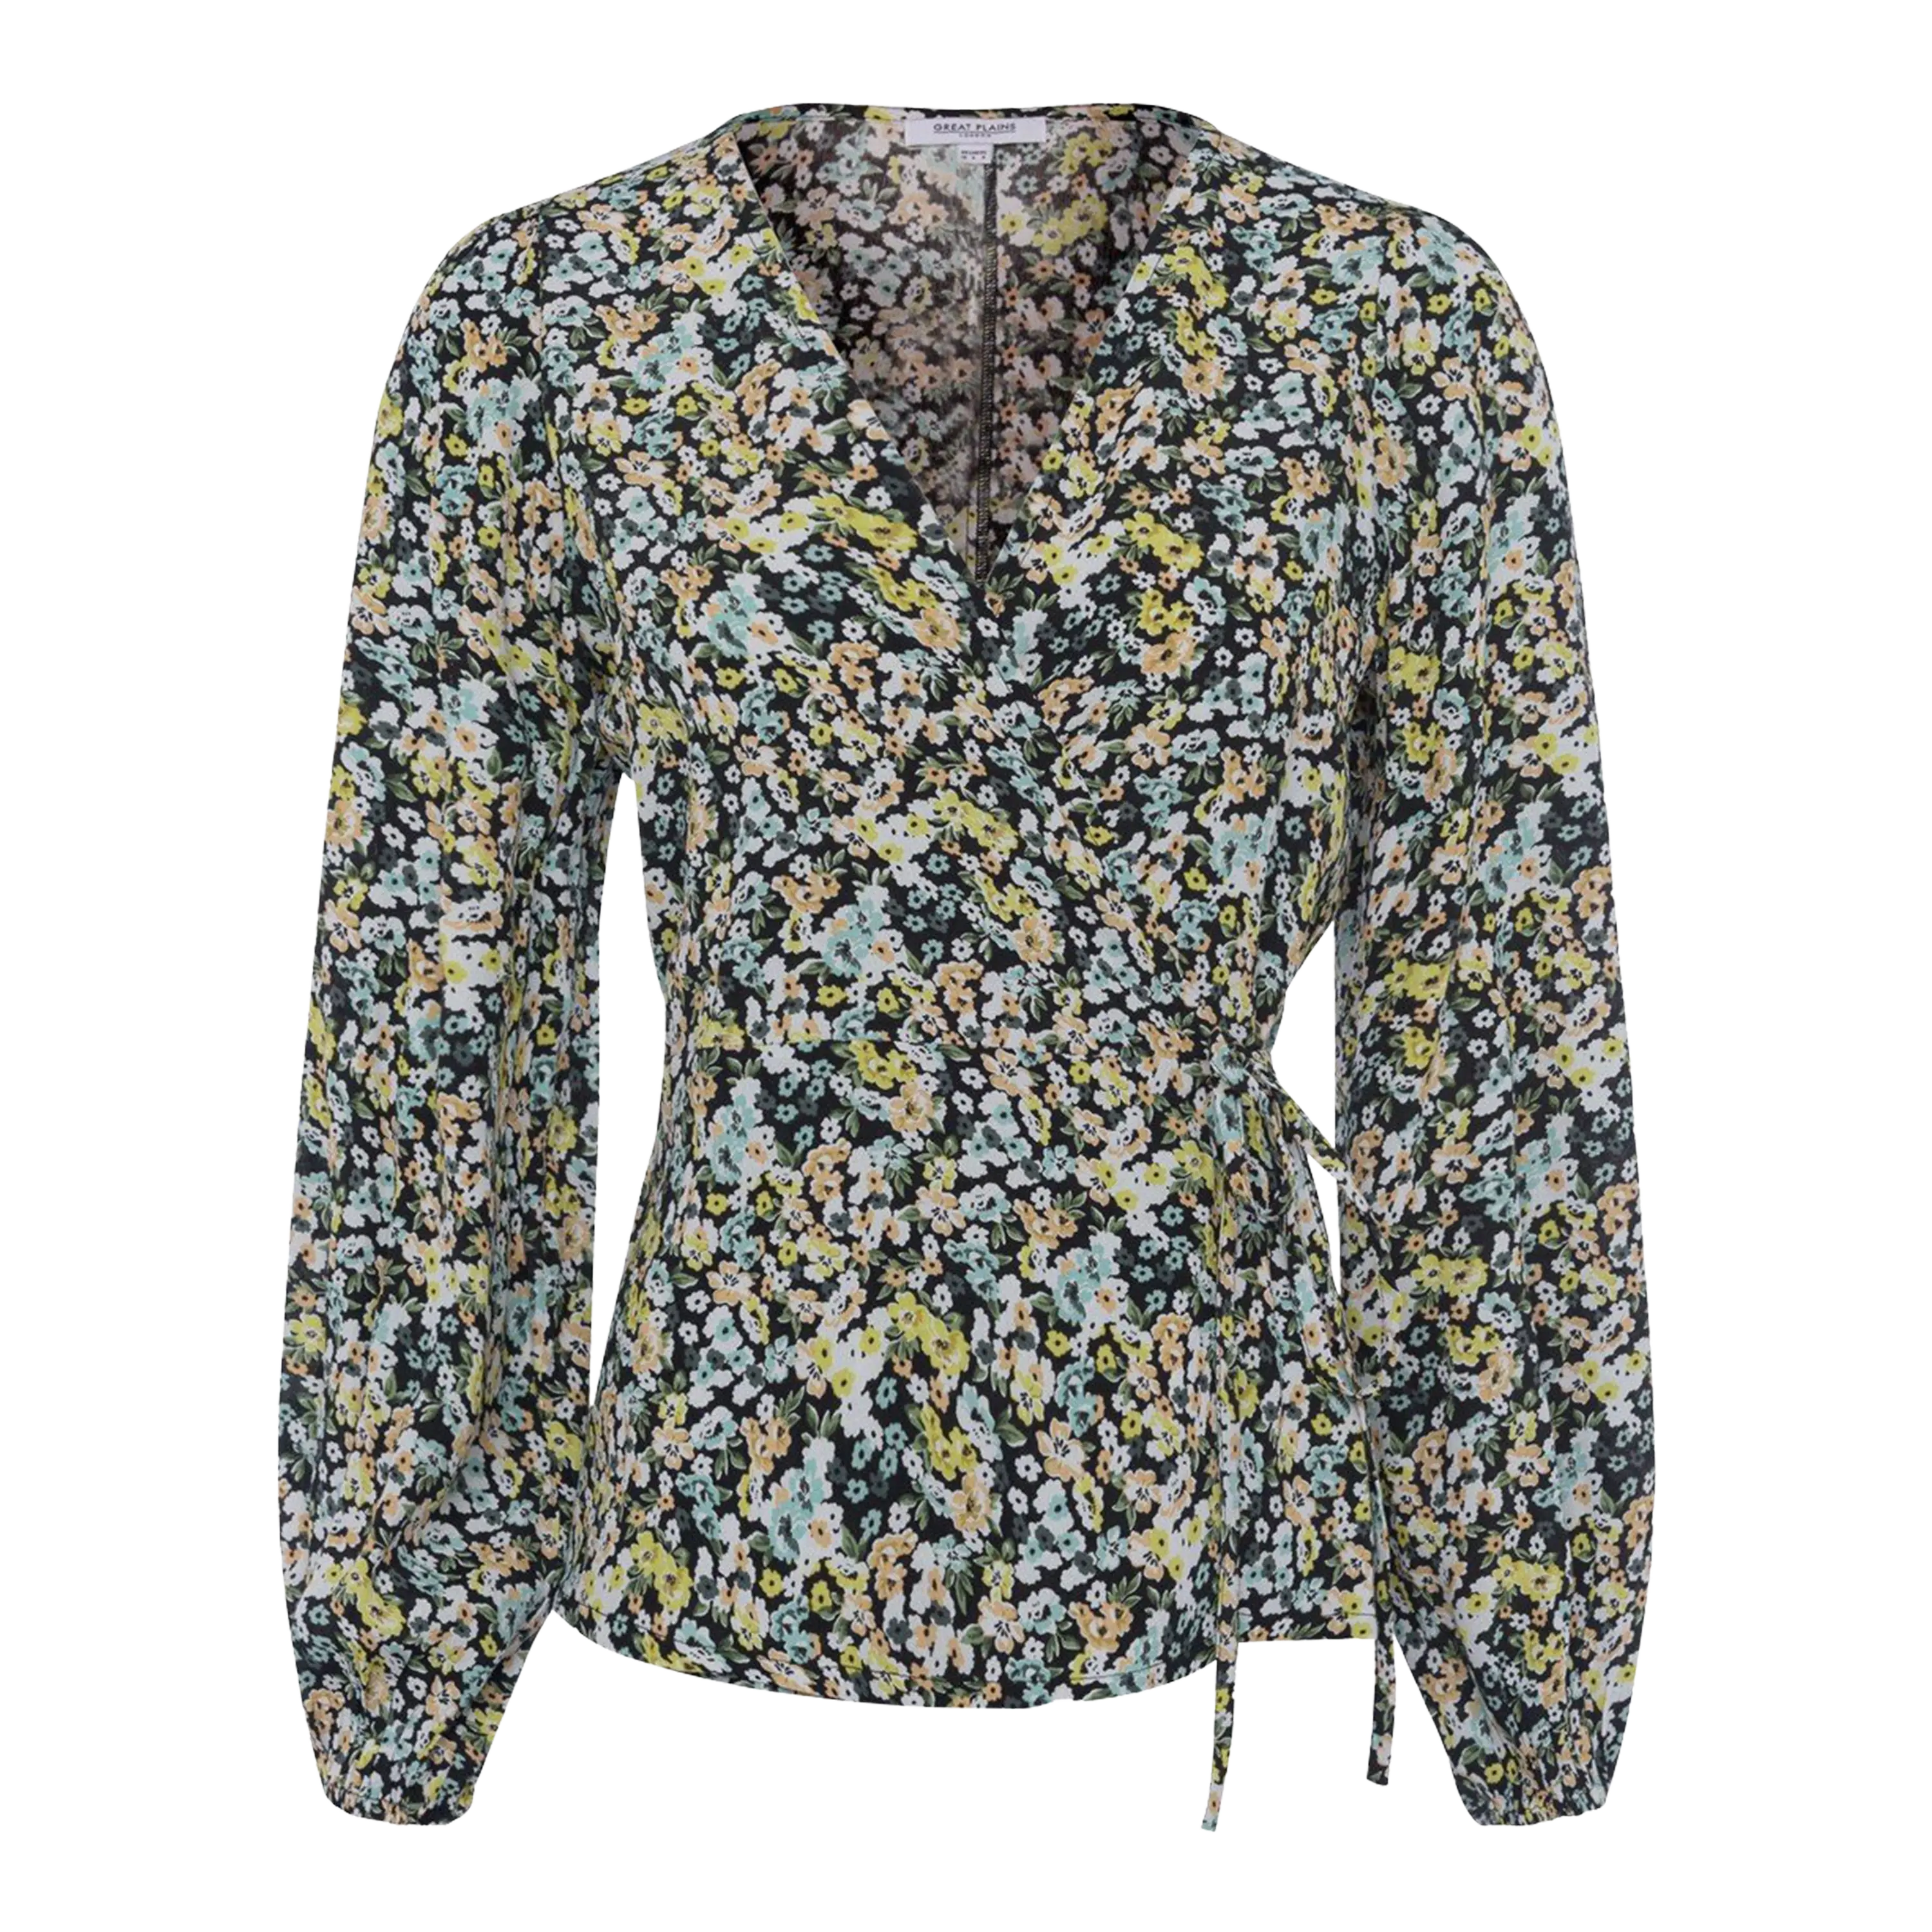 Great Plains Winter Bloom Wrap Top for Women